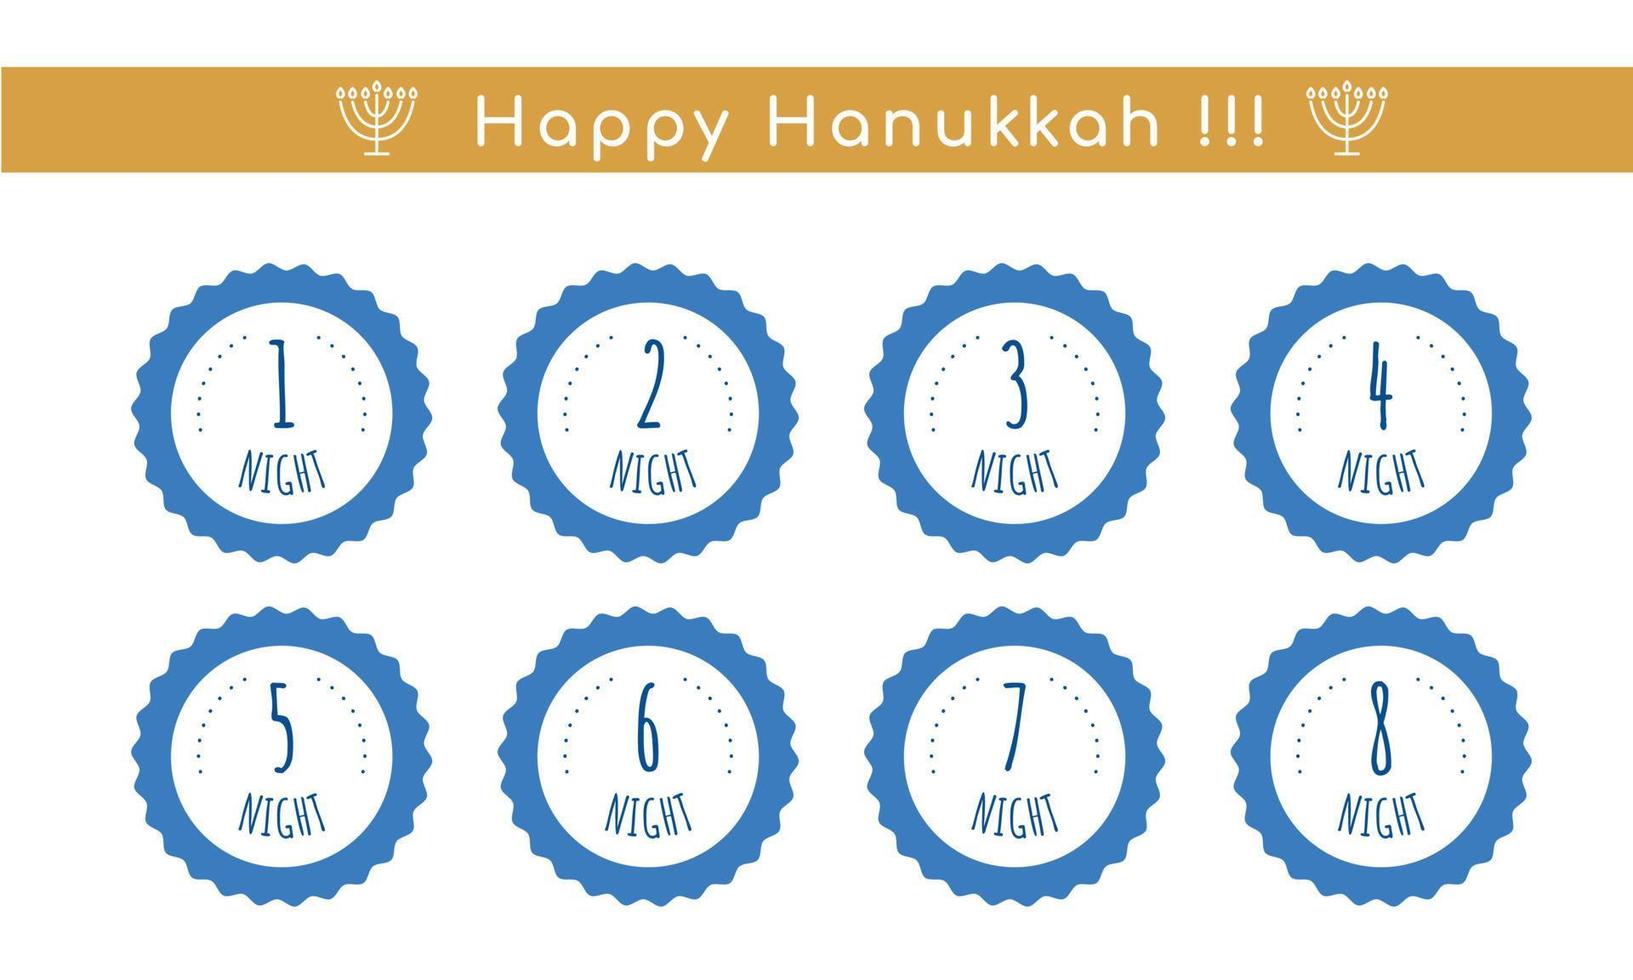 Hanukkah candles are lit day after day. Lighting rules. Jewish menorah tradition. Religion symbol, tag set. Vector illustration